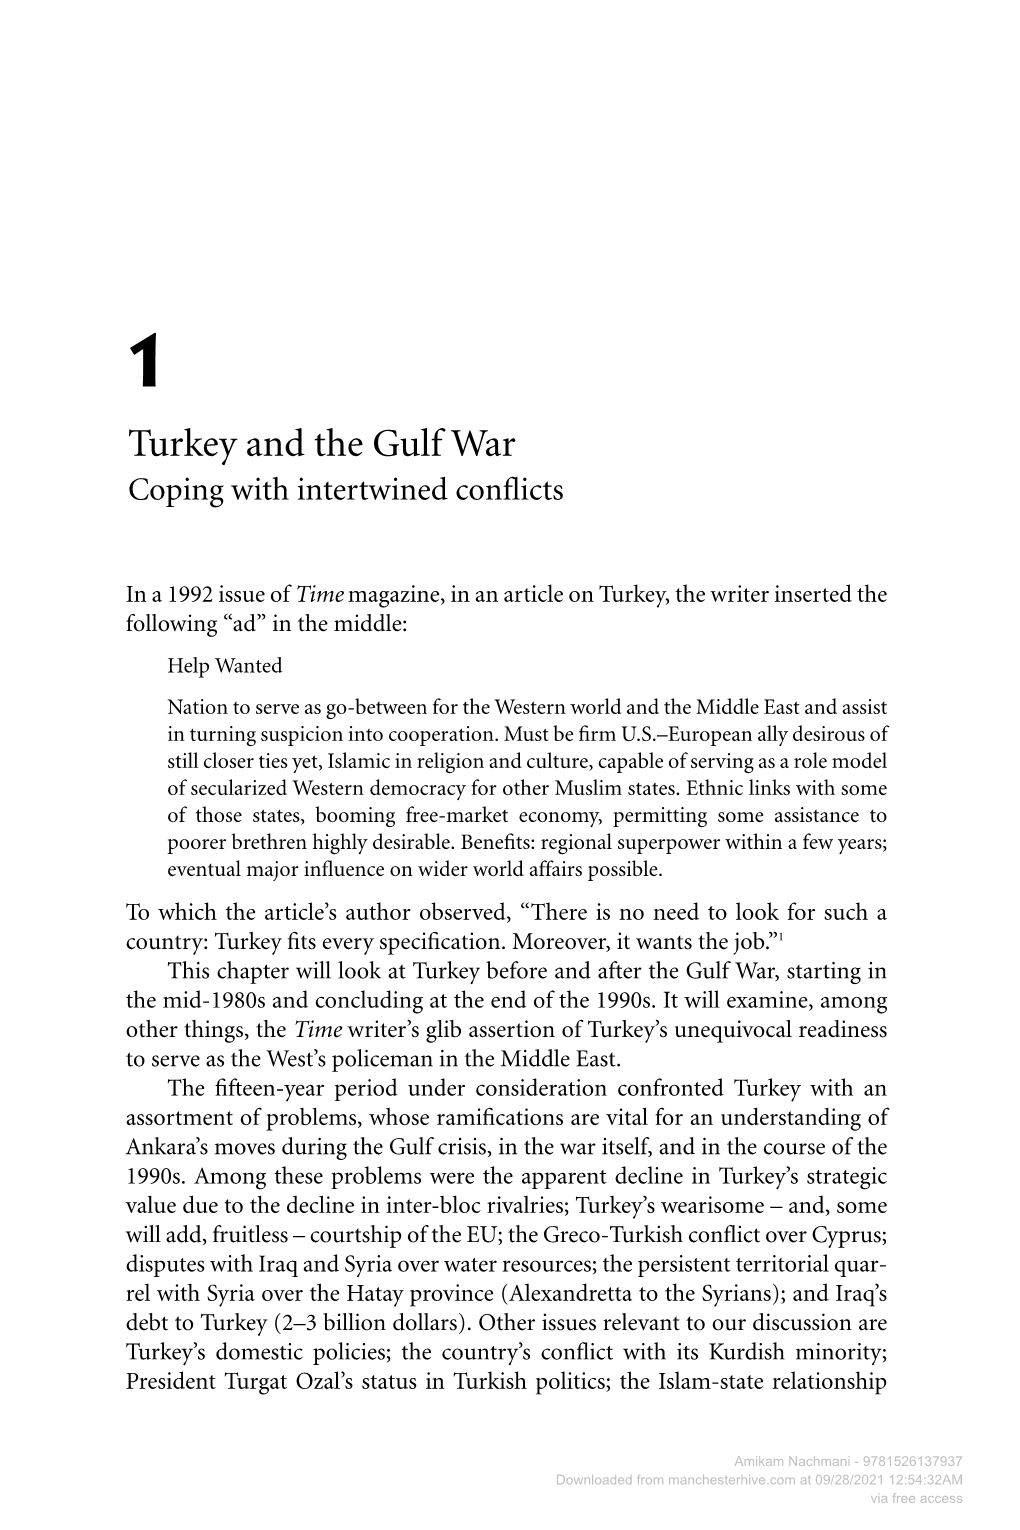 Turkey and the Gulf War Coping with Intertwined Conﬂicts